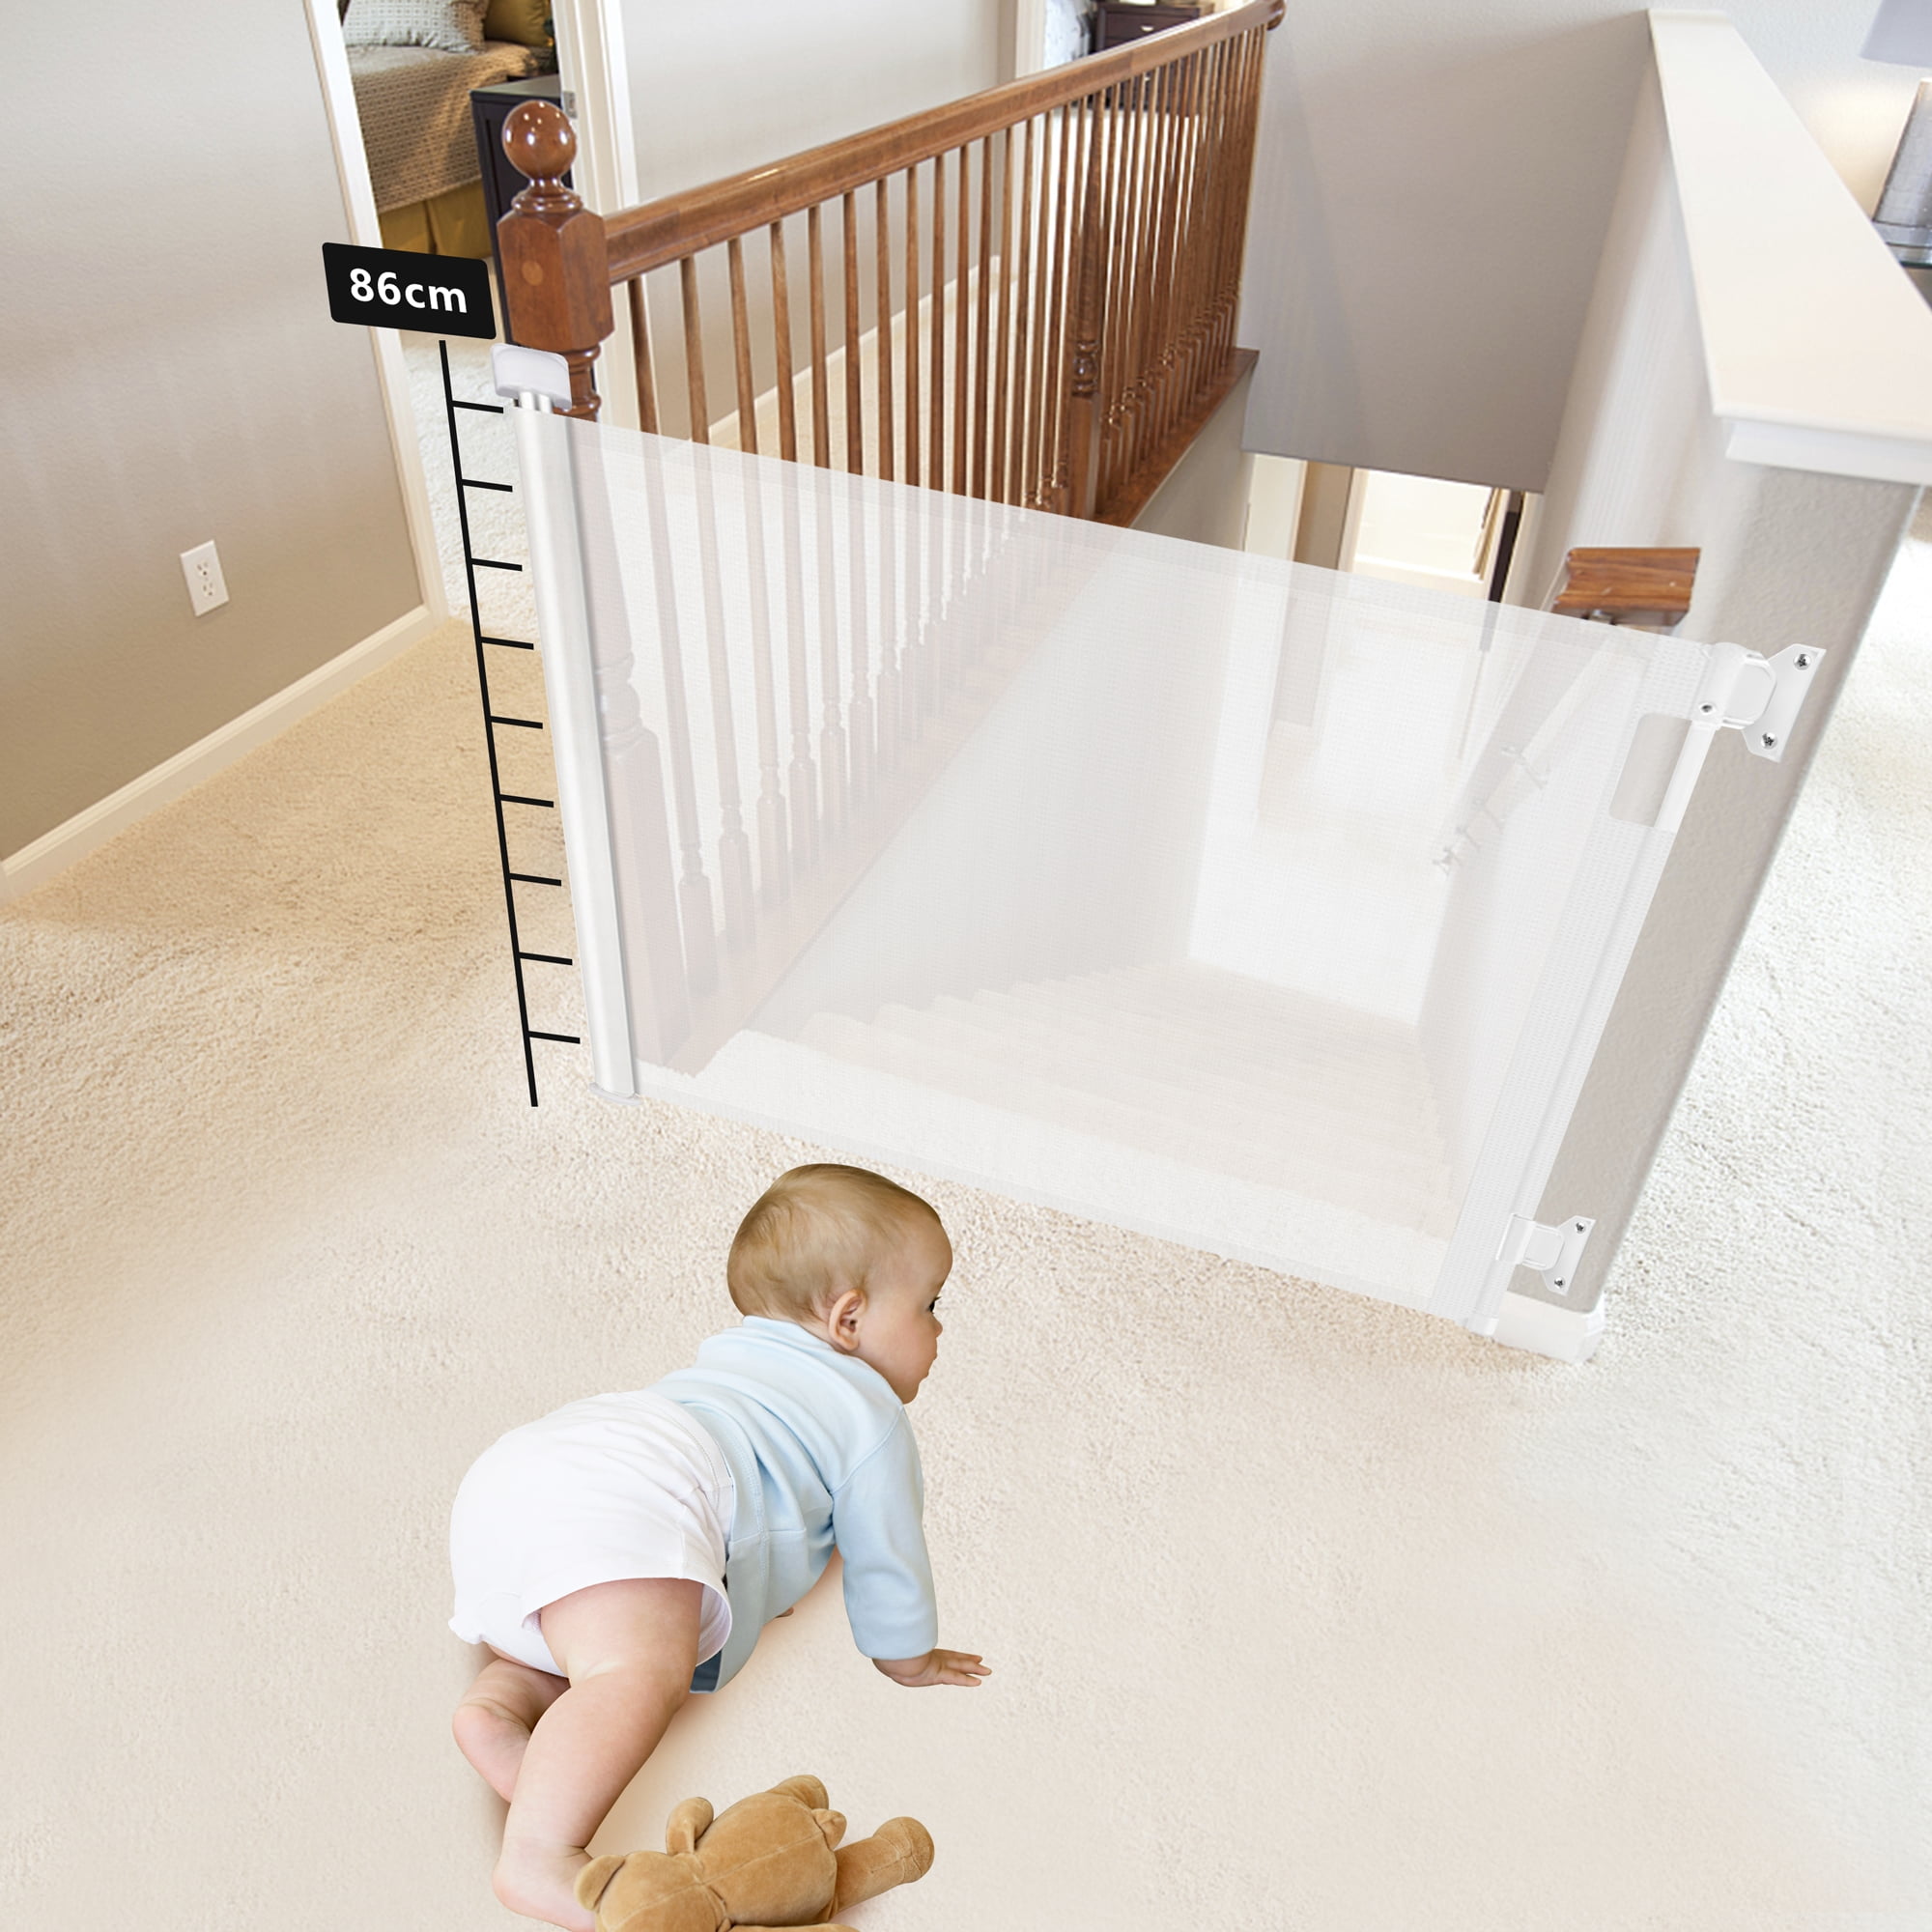 Extra Wide and Tall Advanced Retractable Baby Gate Mesh Stair Gate by Safetots 